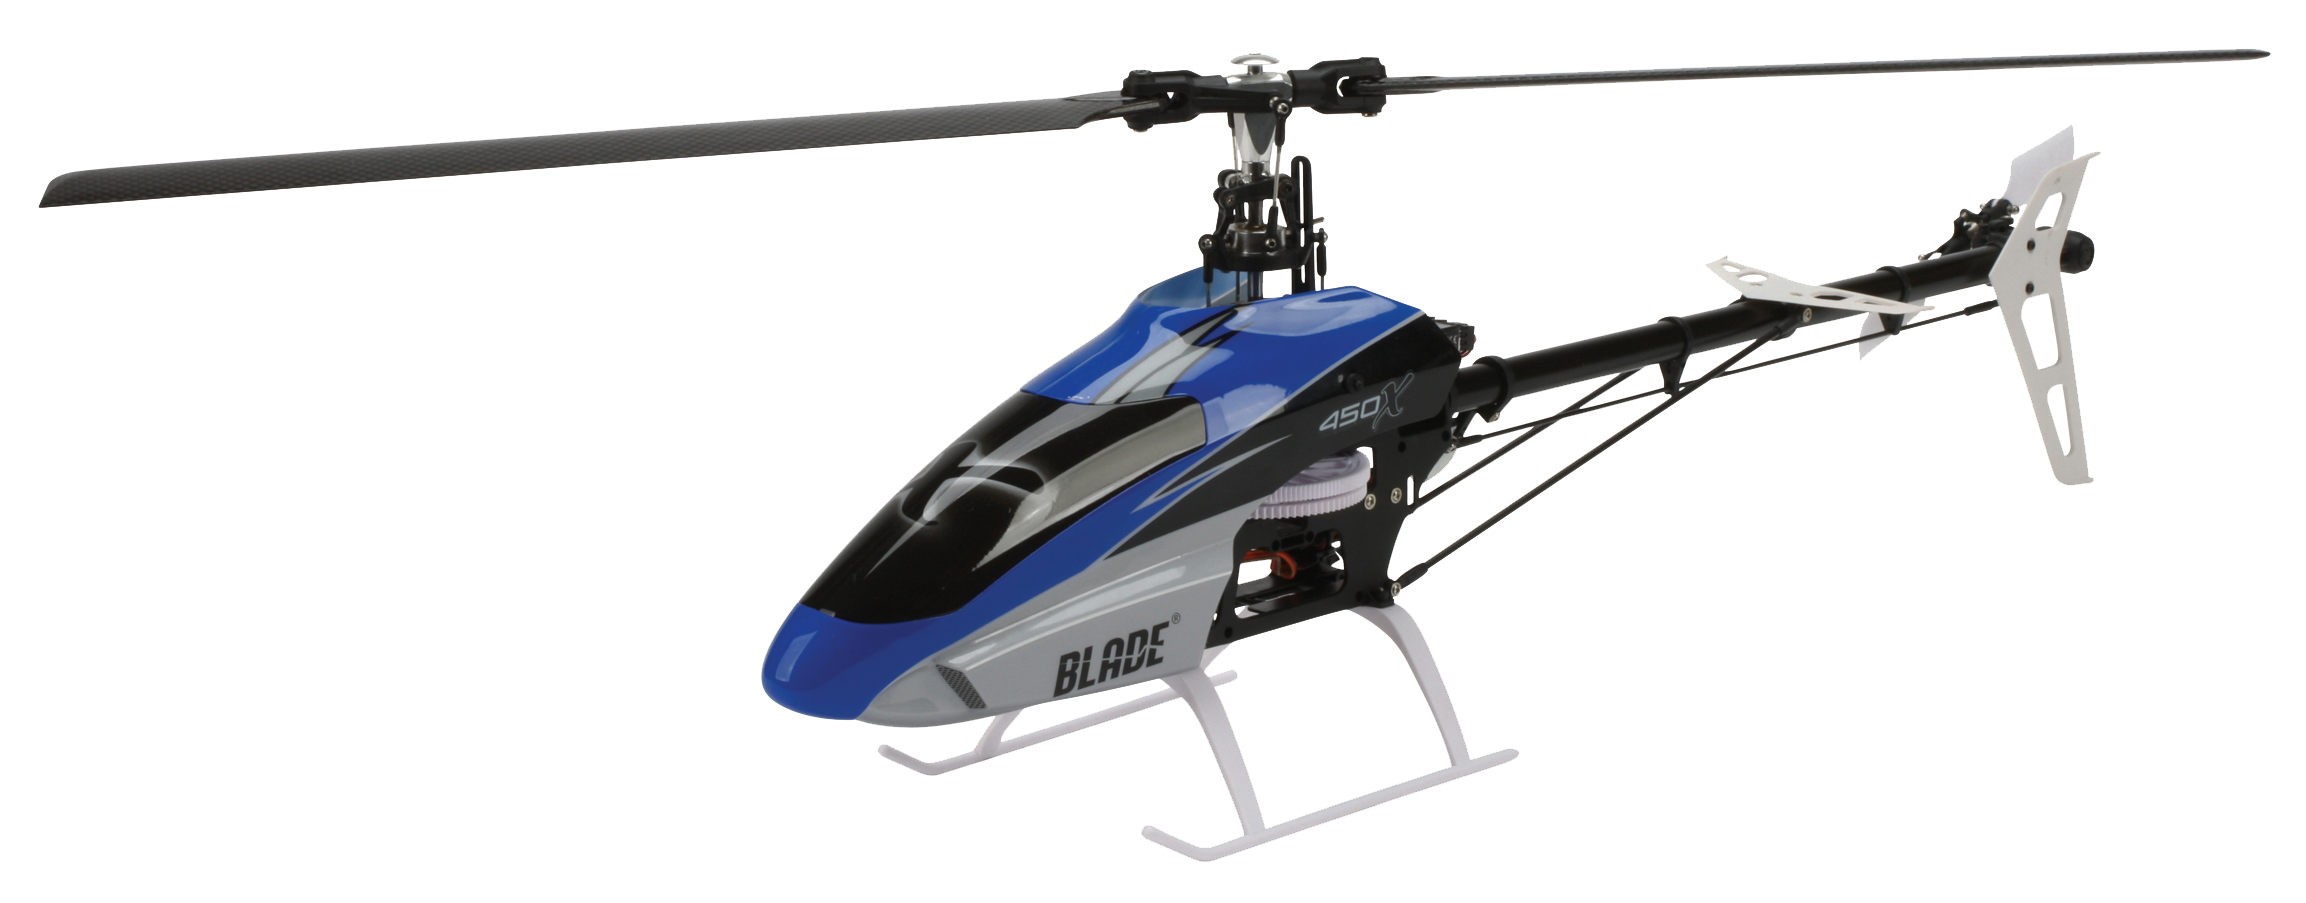 helicopter clipart remote control helicopter